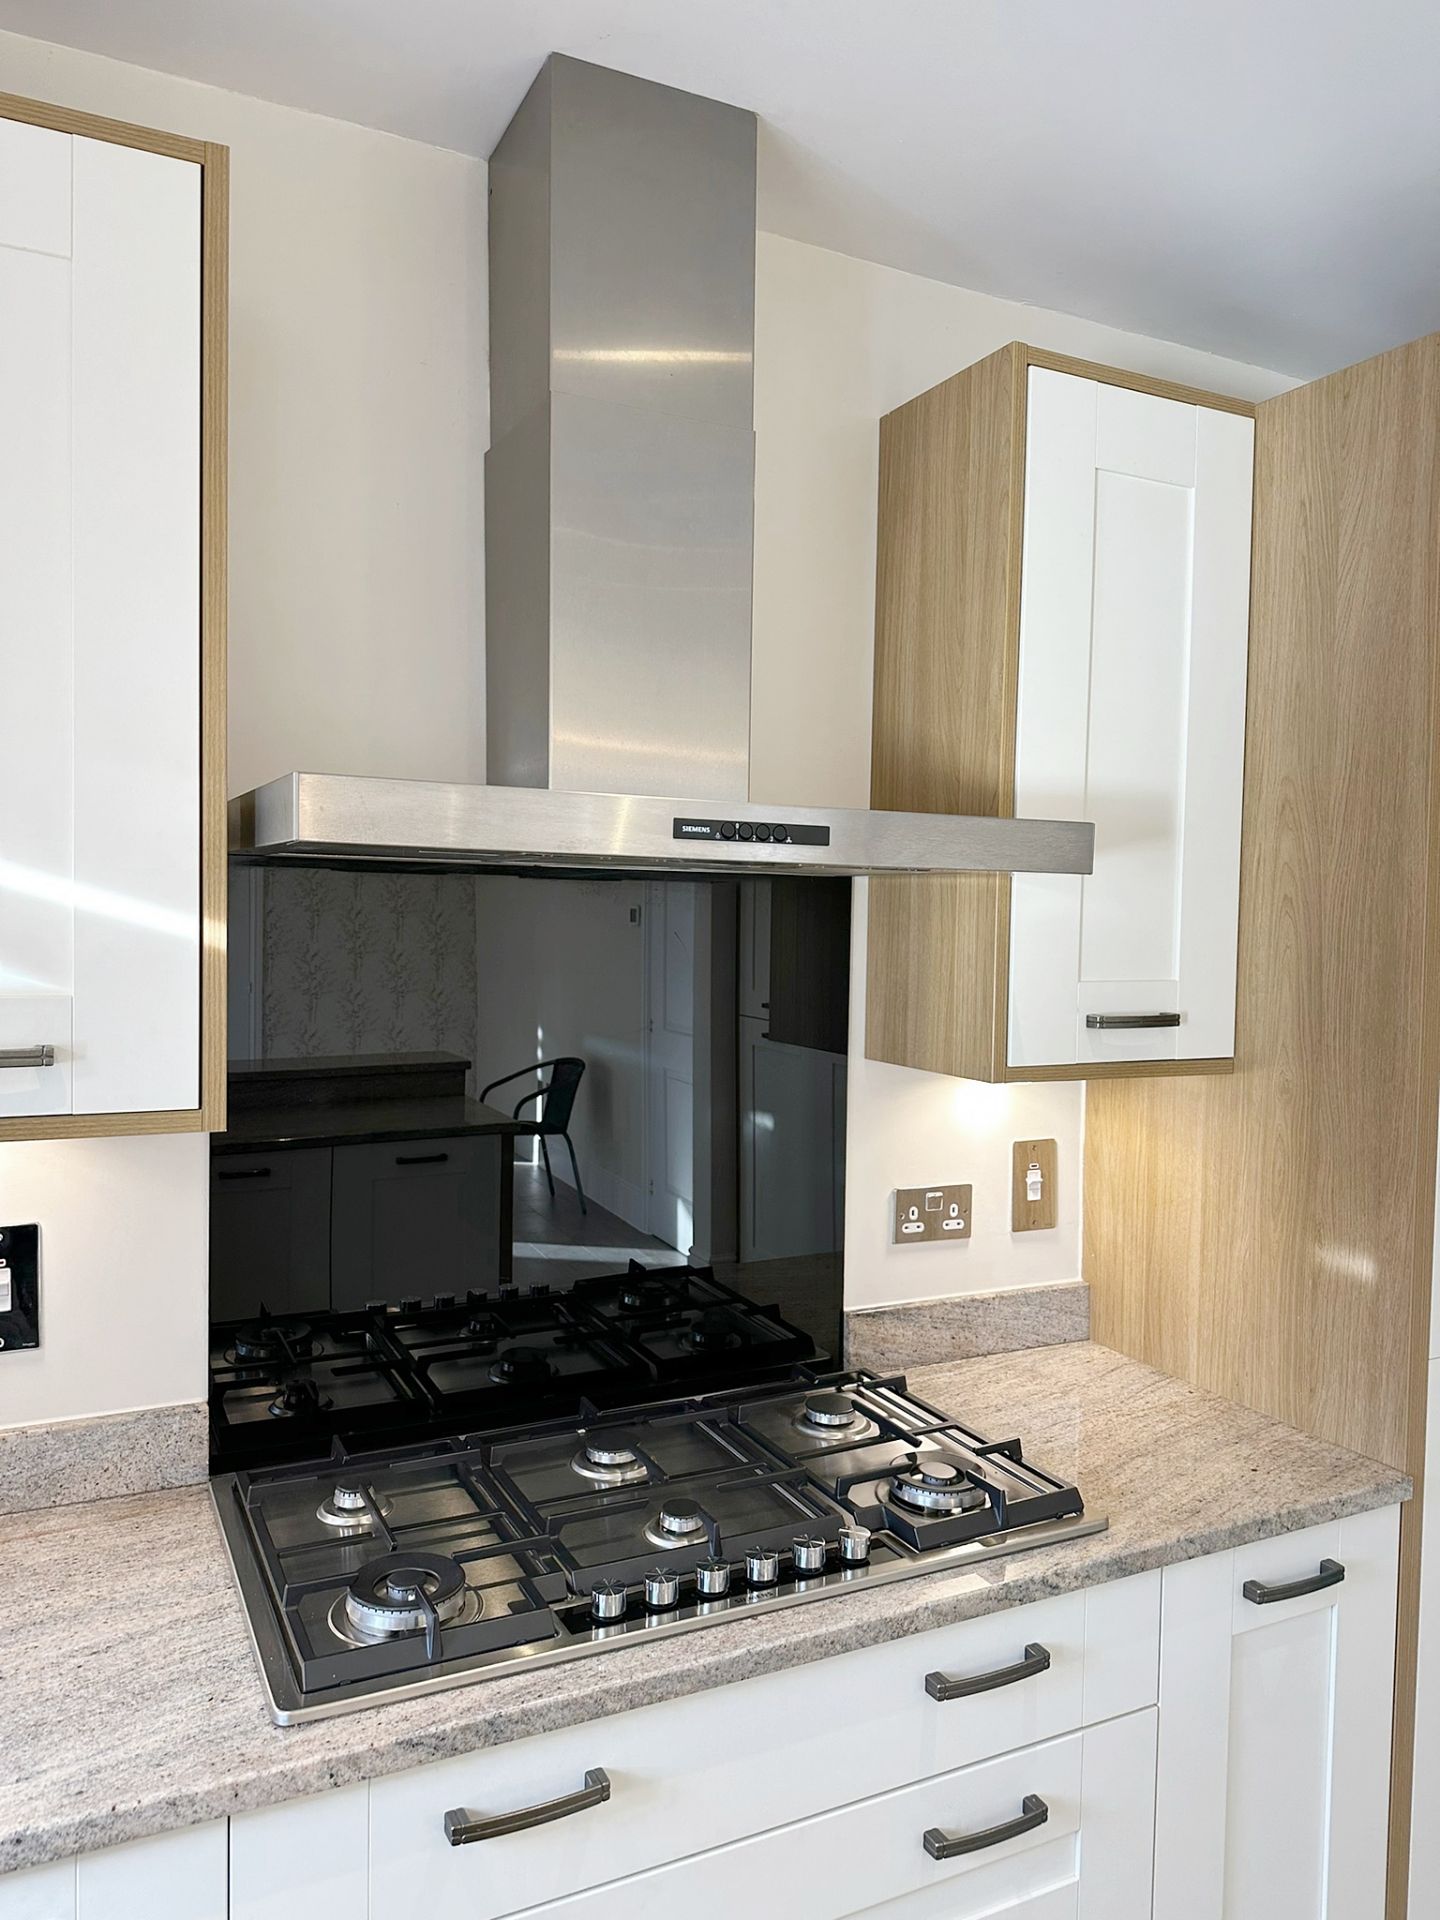 1 x SYMPHONY Contemporary Bespoke Fitted Shaker-Style Kitchen, With Branded Appliances, Granite Tops - Image 20 of 36